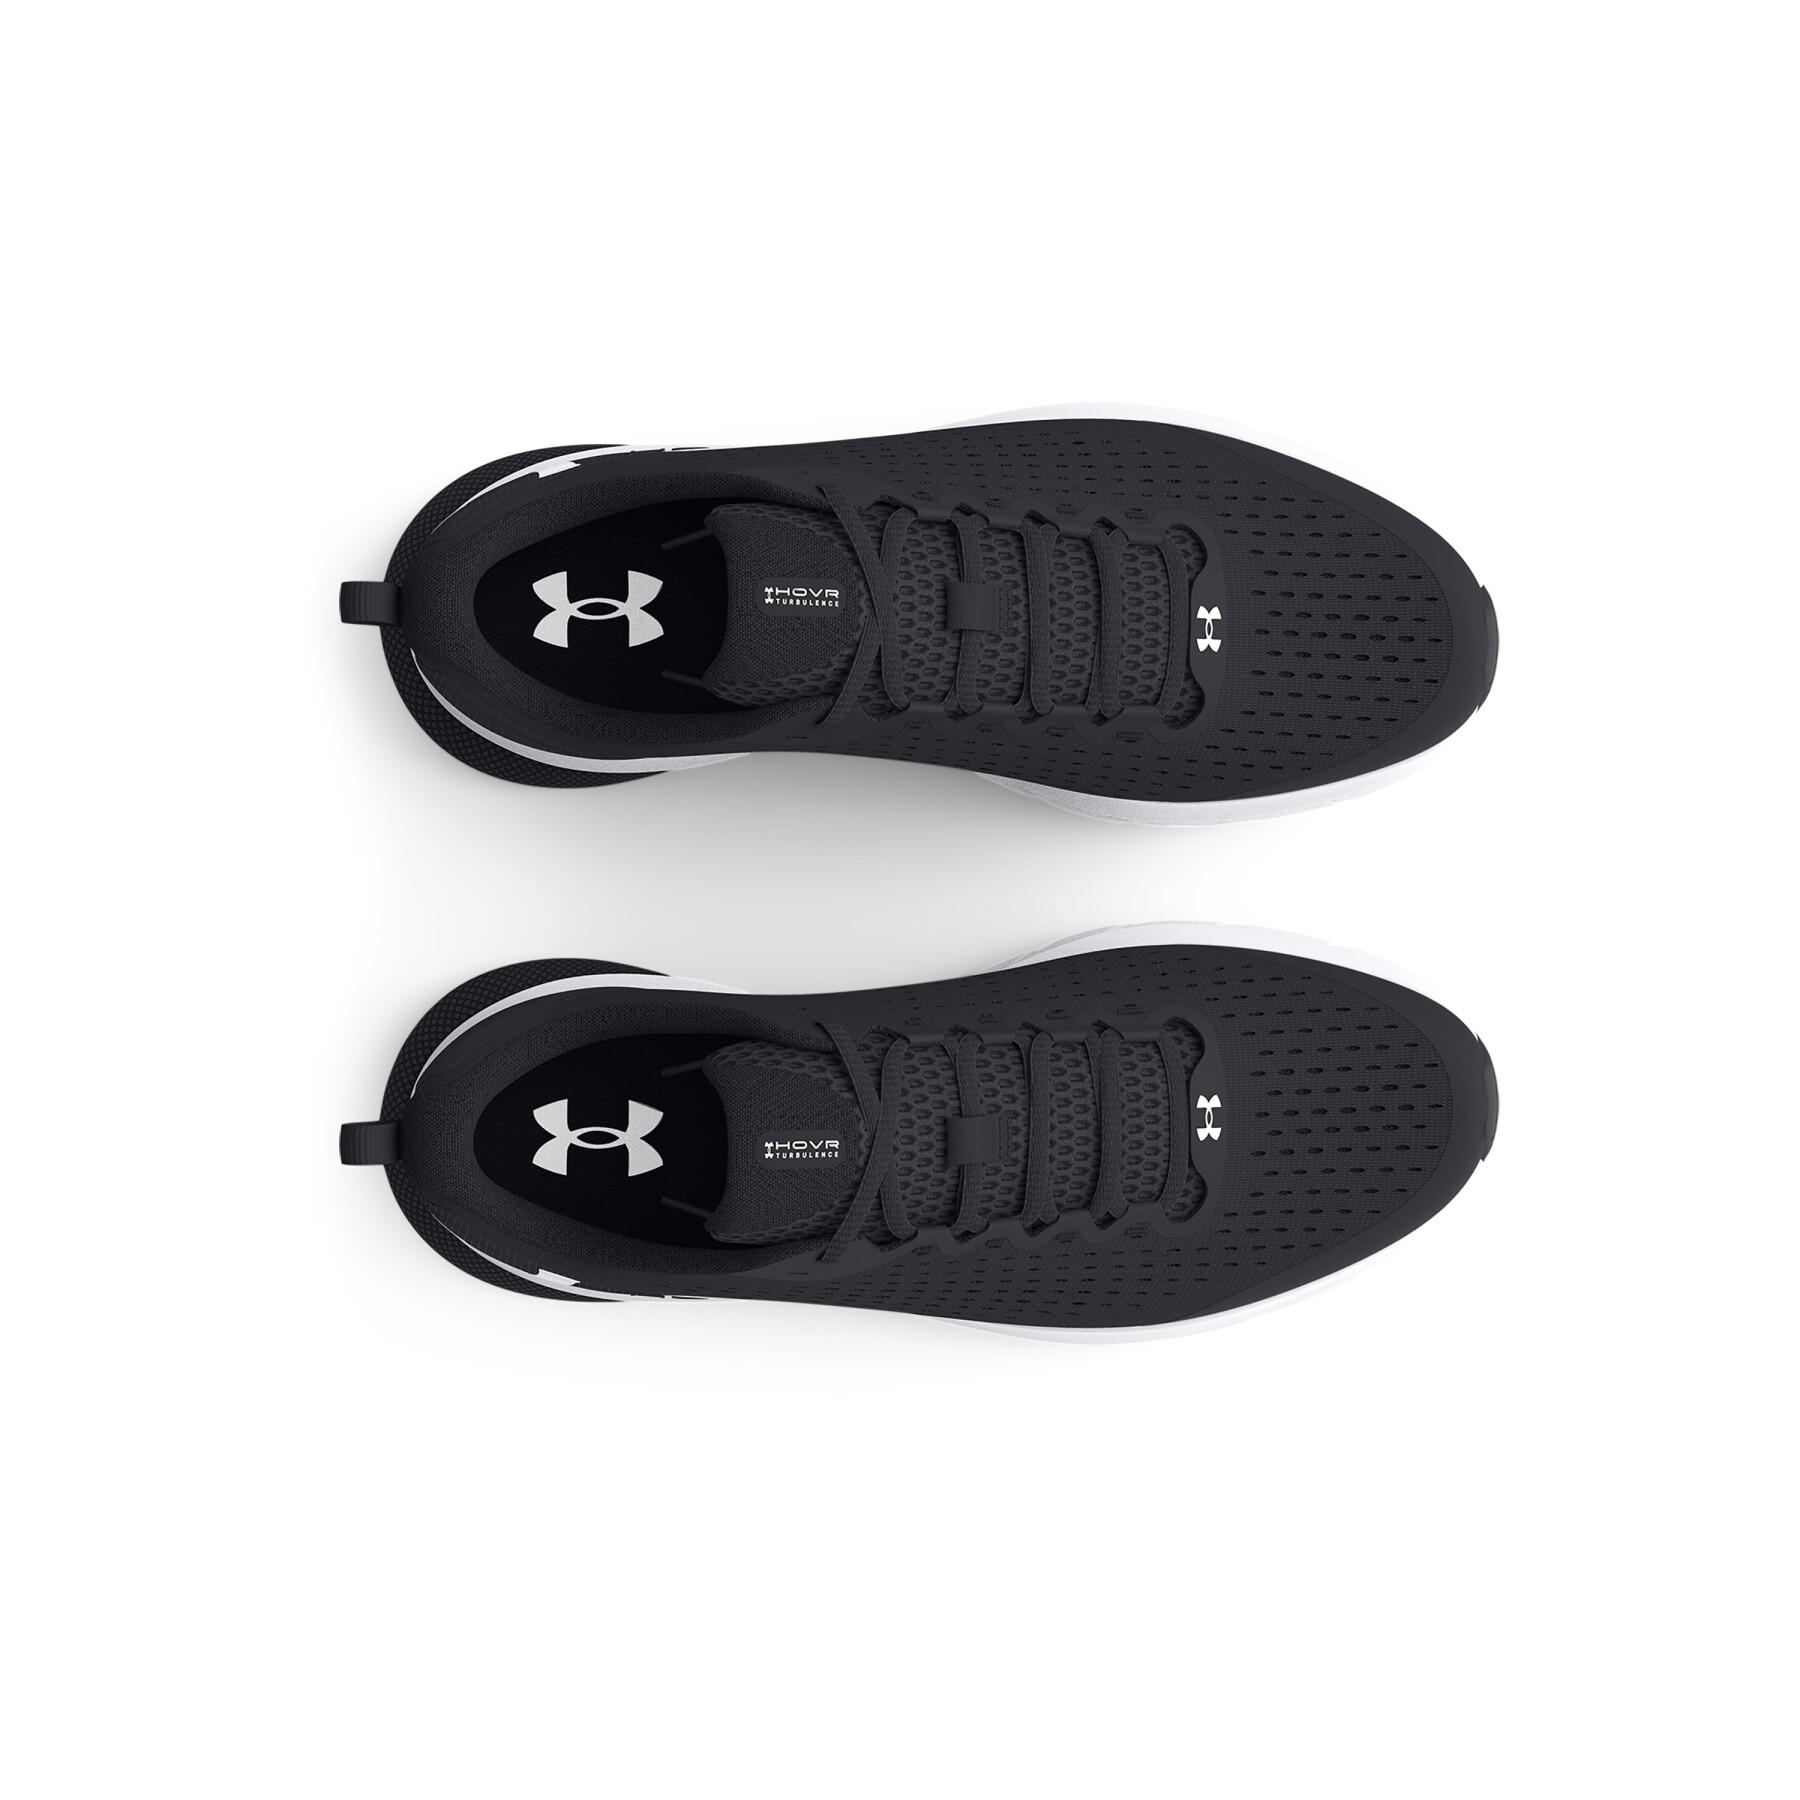 Women's running shoes Under Armour HOVR™ Turbulence